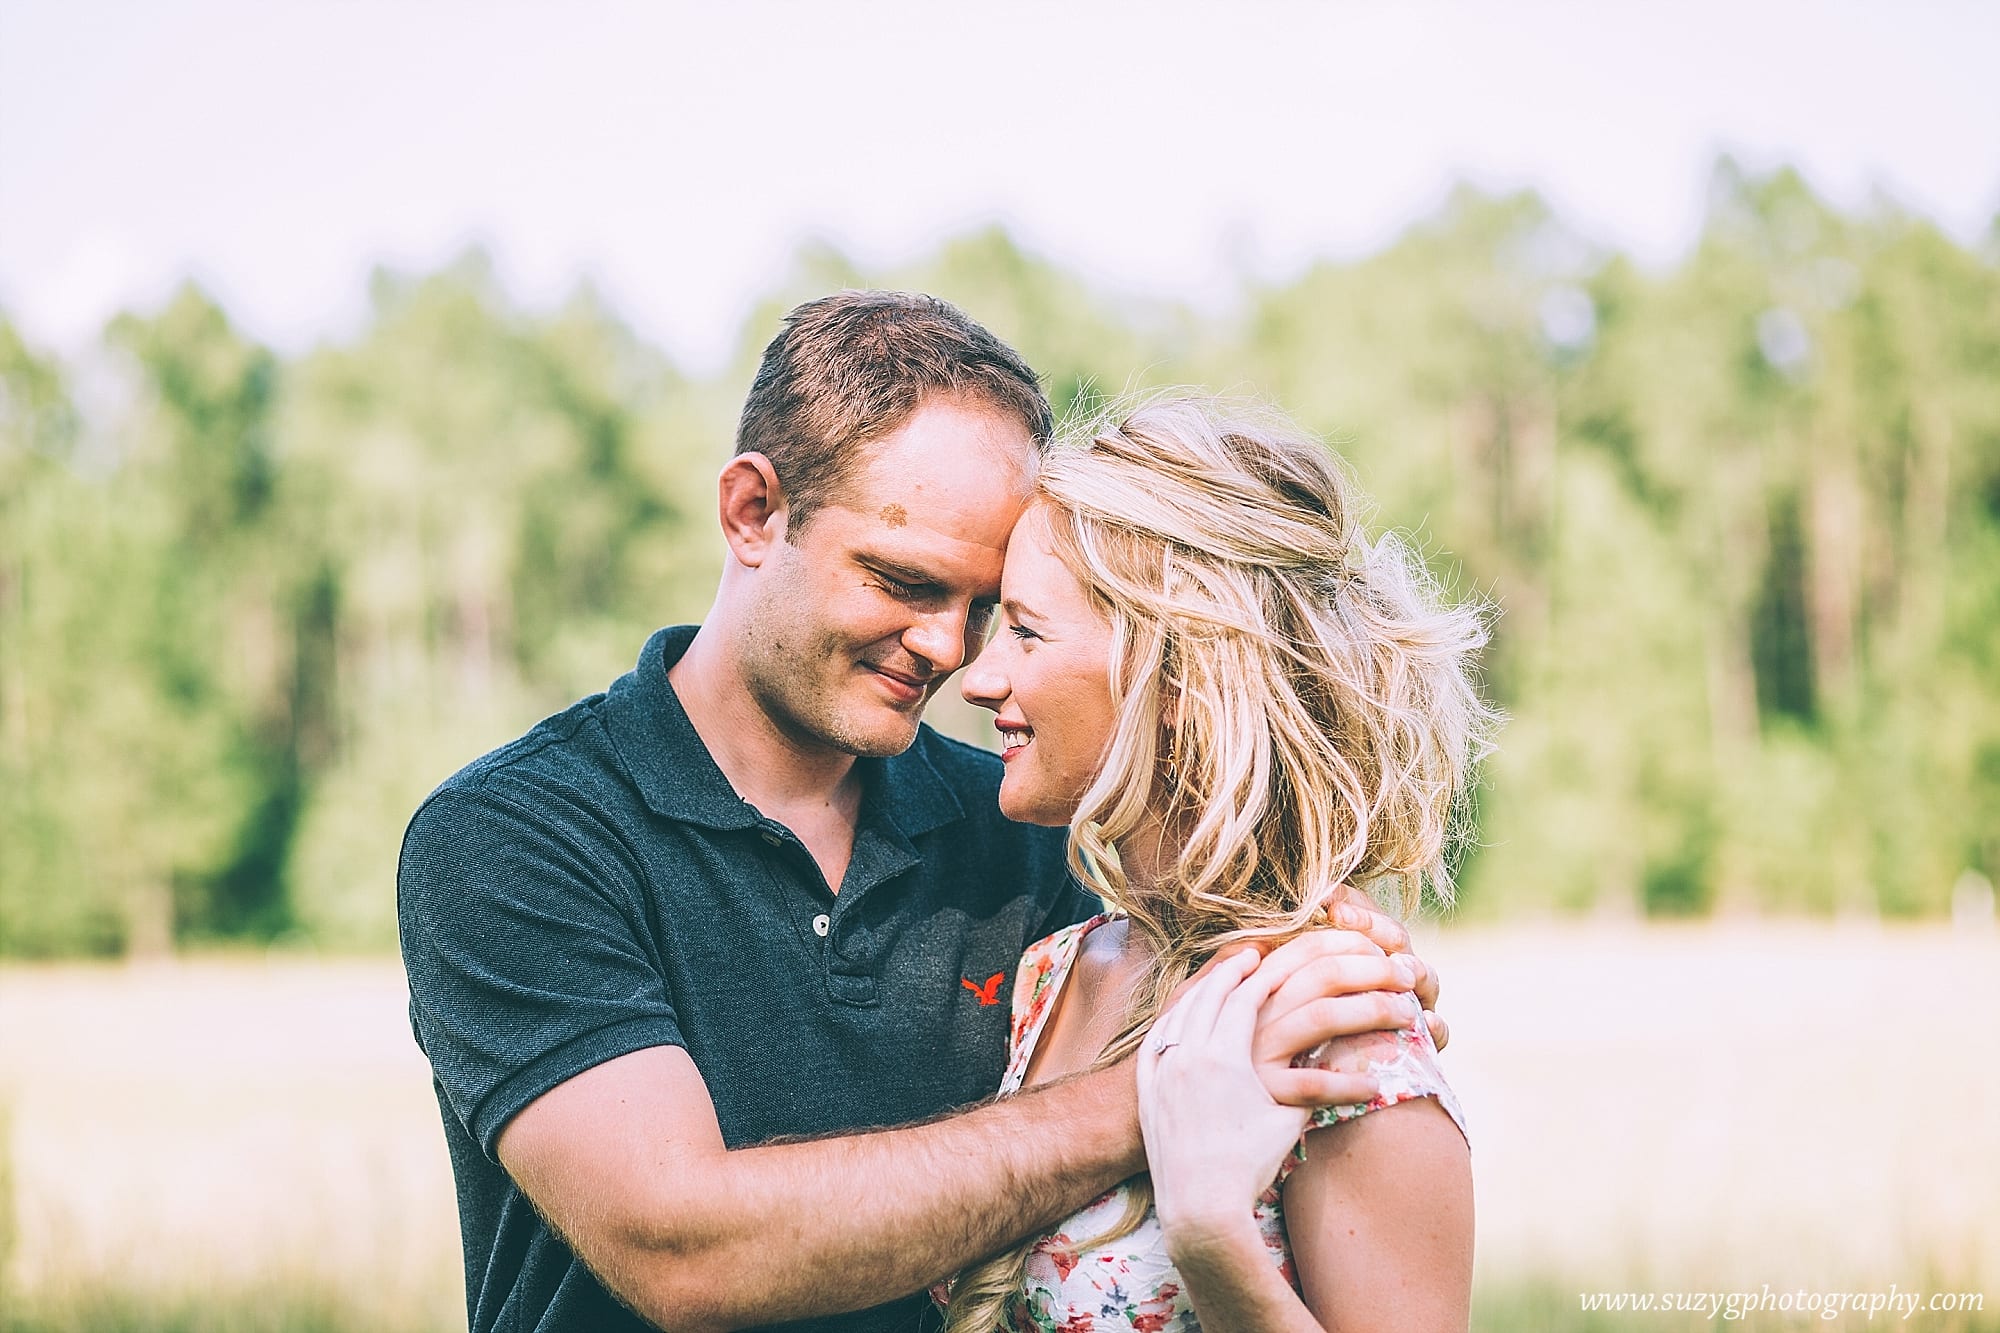 engagements-new orleans-texas-baton rouge-lake charles-suzy g-photography-suzygphotography_0011